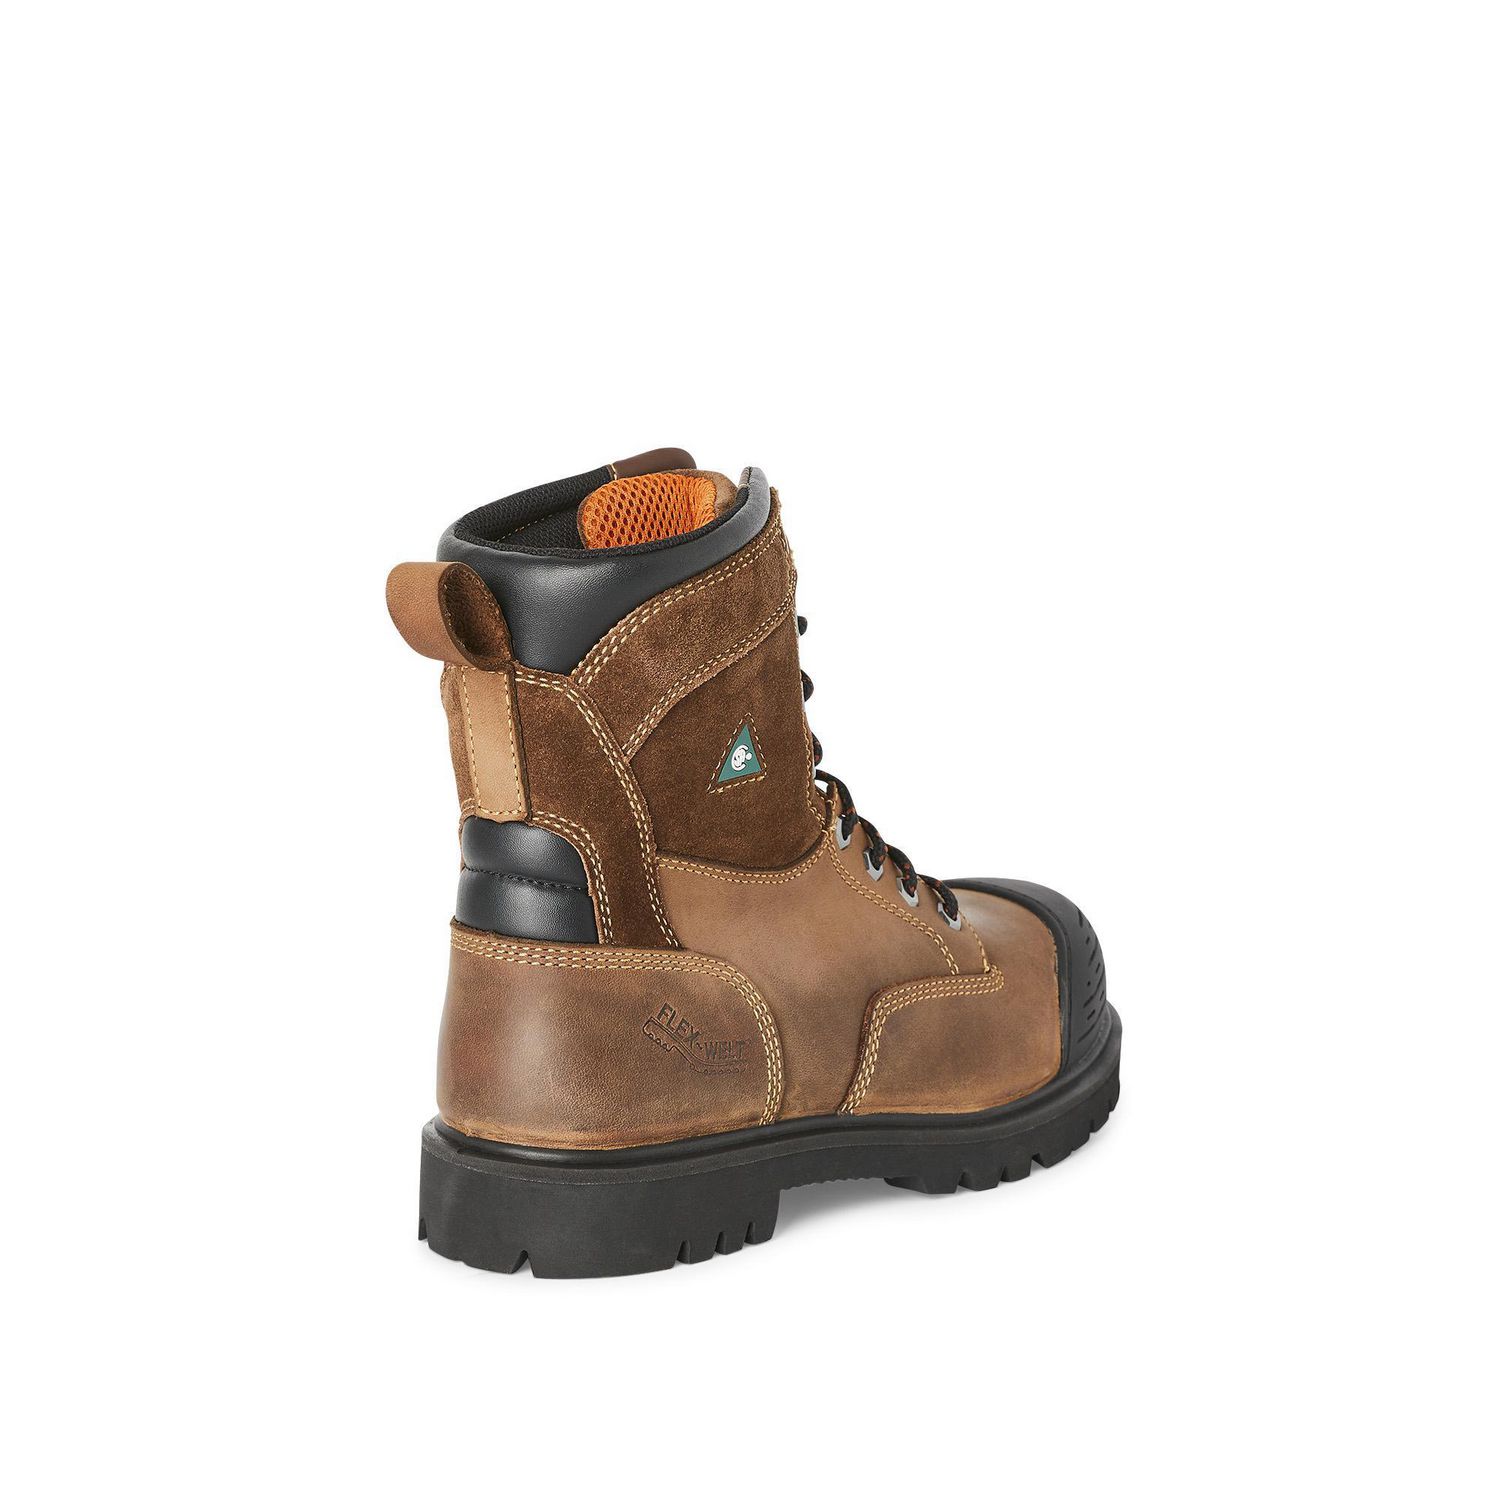 walmart canada safety shoes